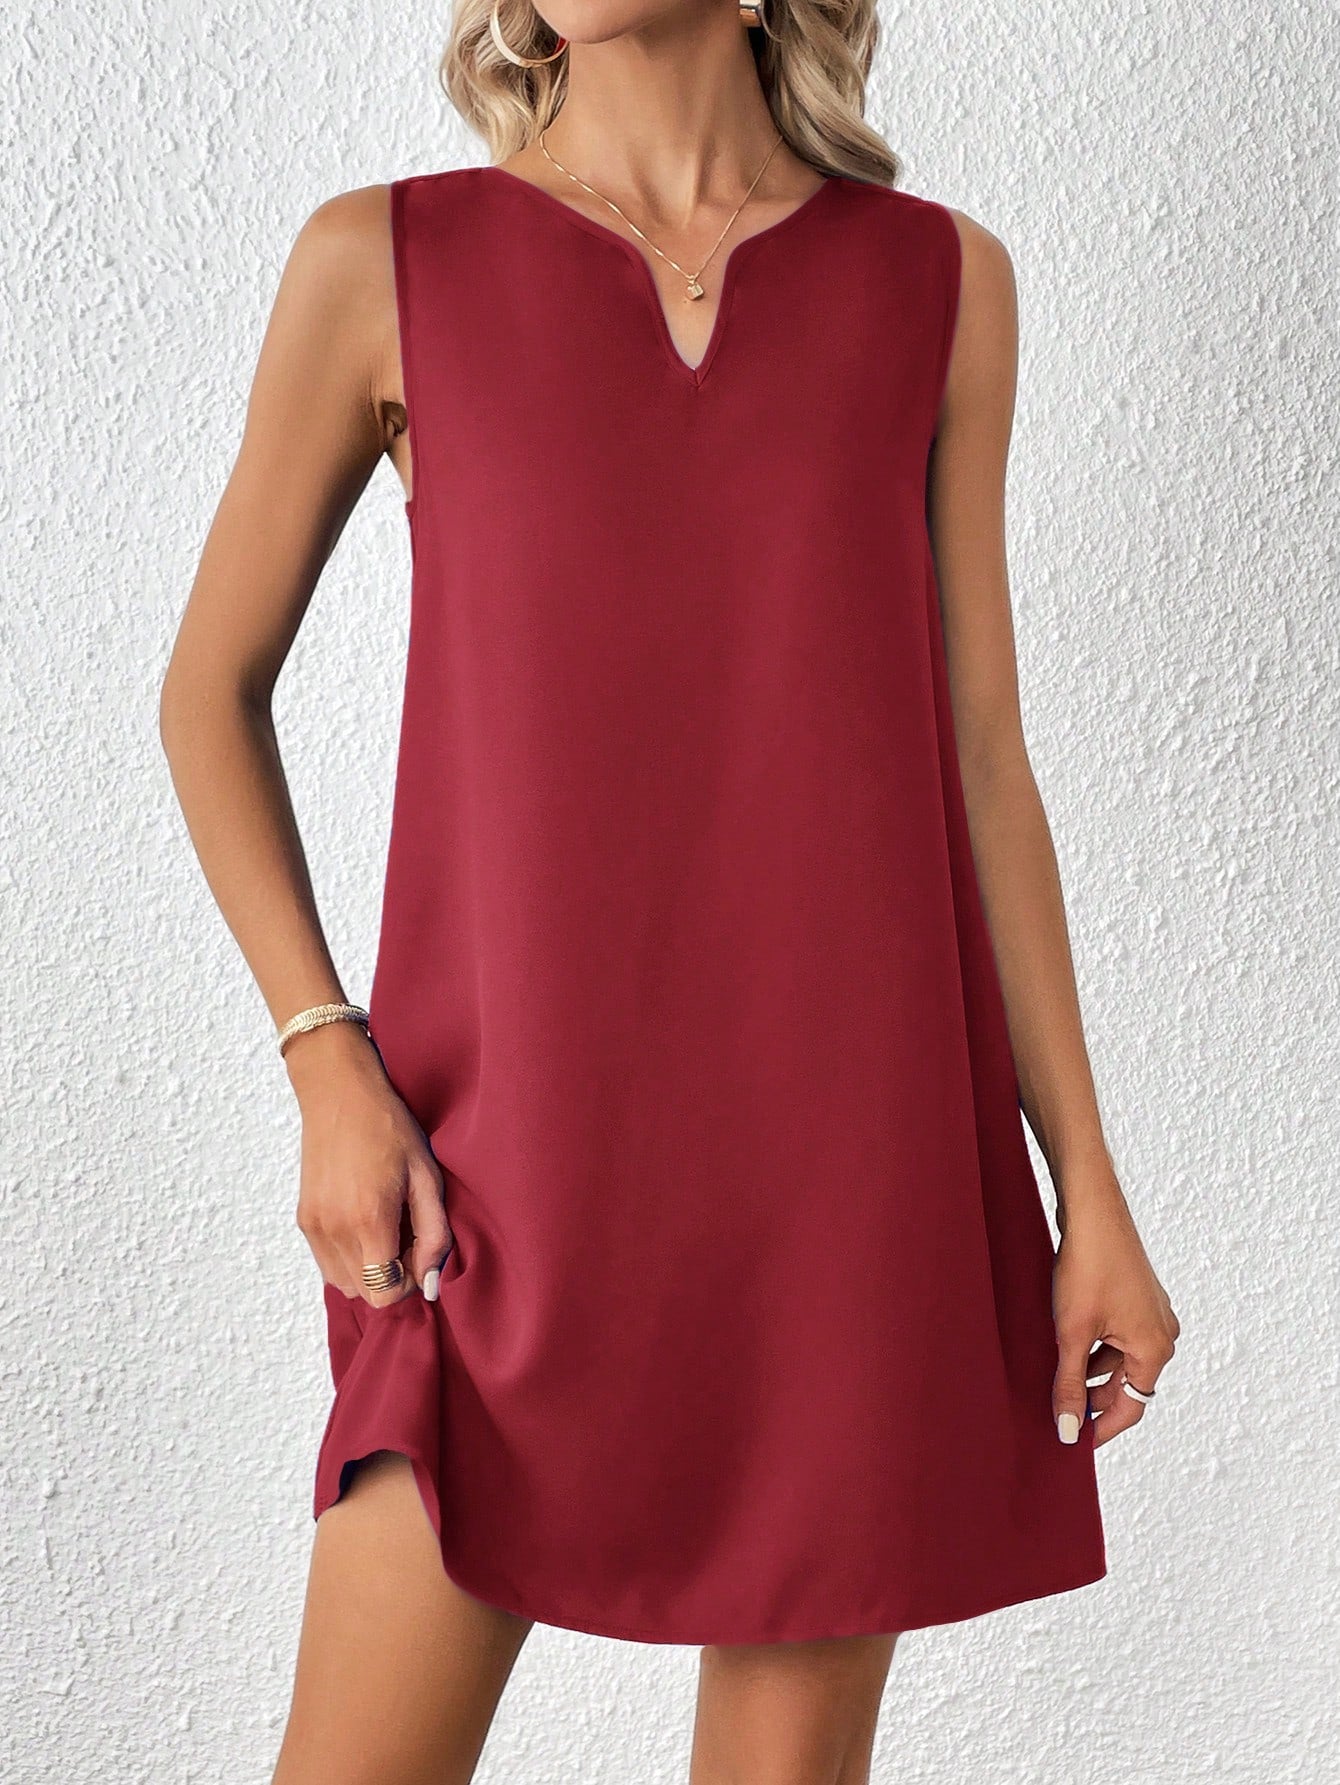 Casual Sleeveless Tank Dress - Notched Neckline, Recycled Material, Short Length